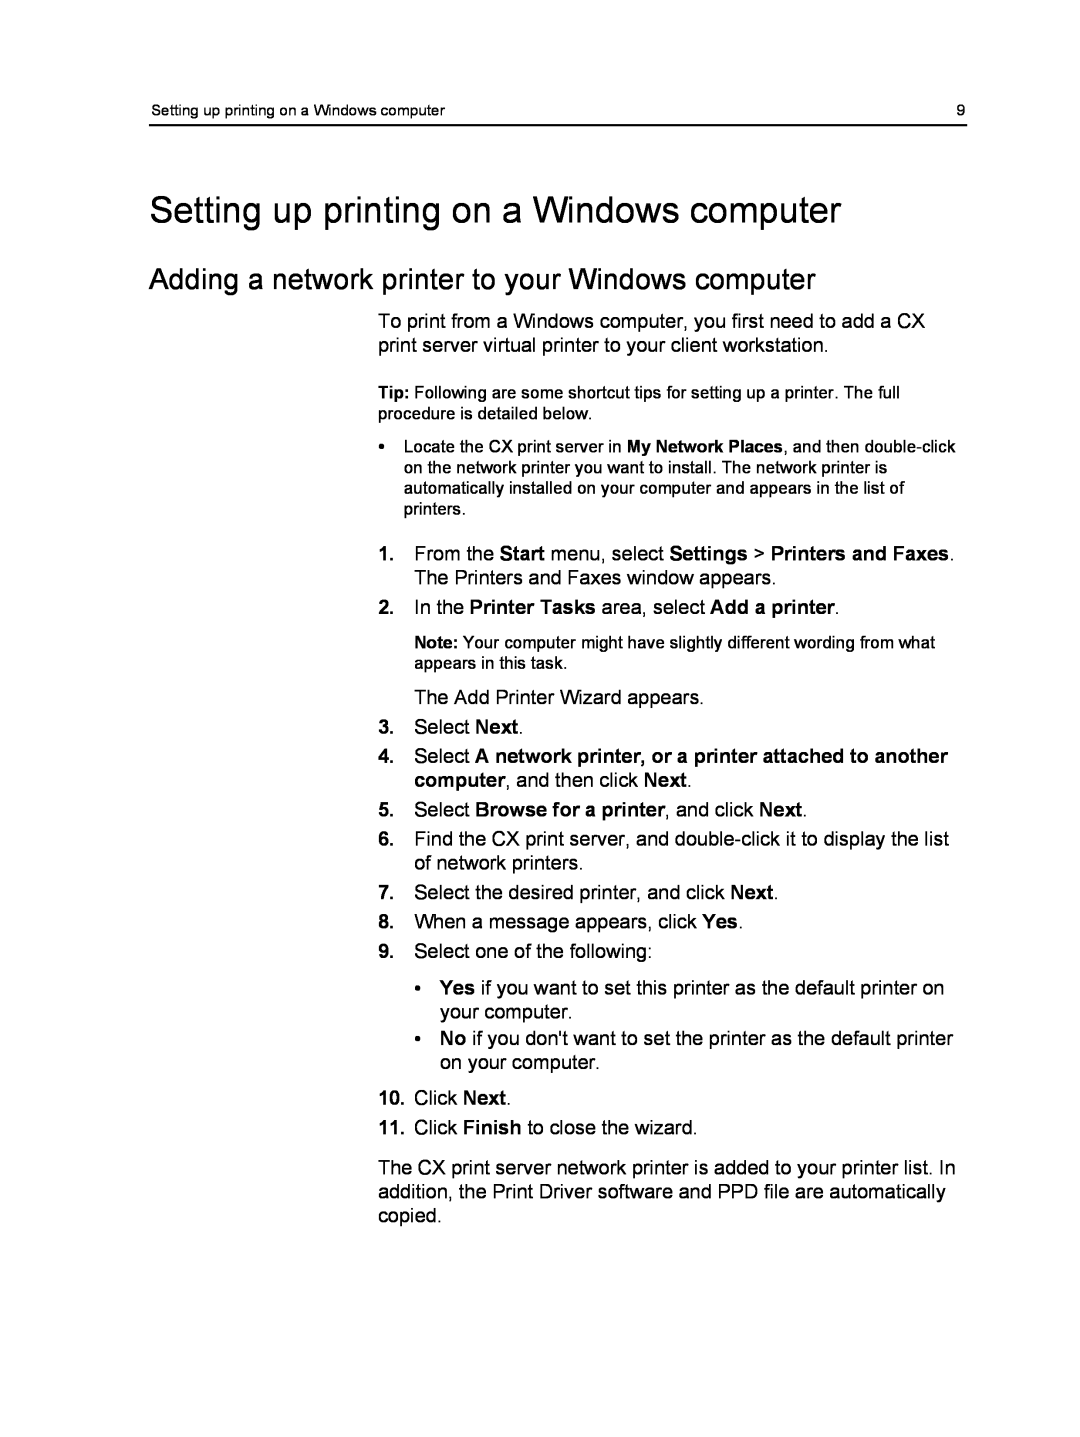 Xerox 550, 560 manual Setting up printing on a Windows computer, Adding a network printer to your Windows computer 